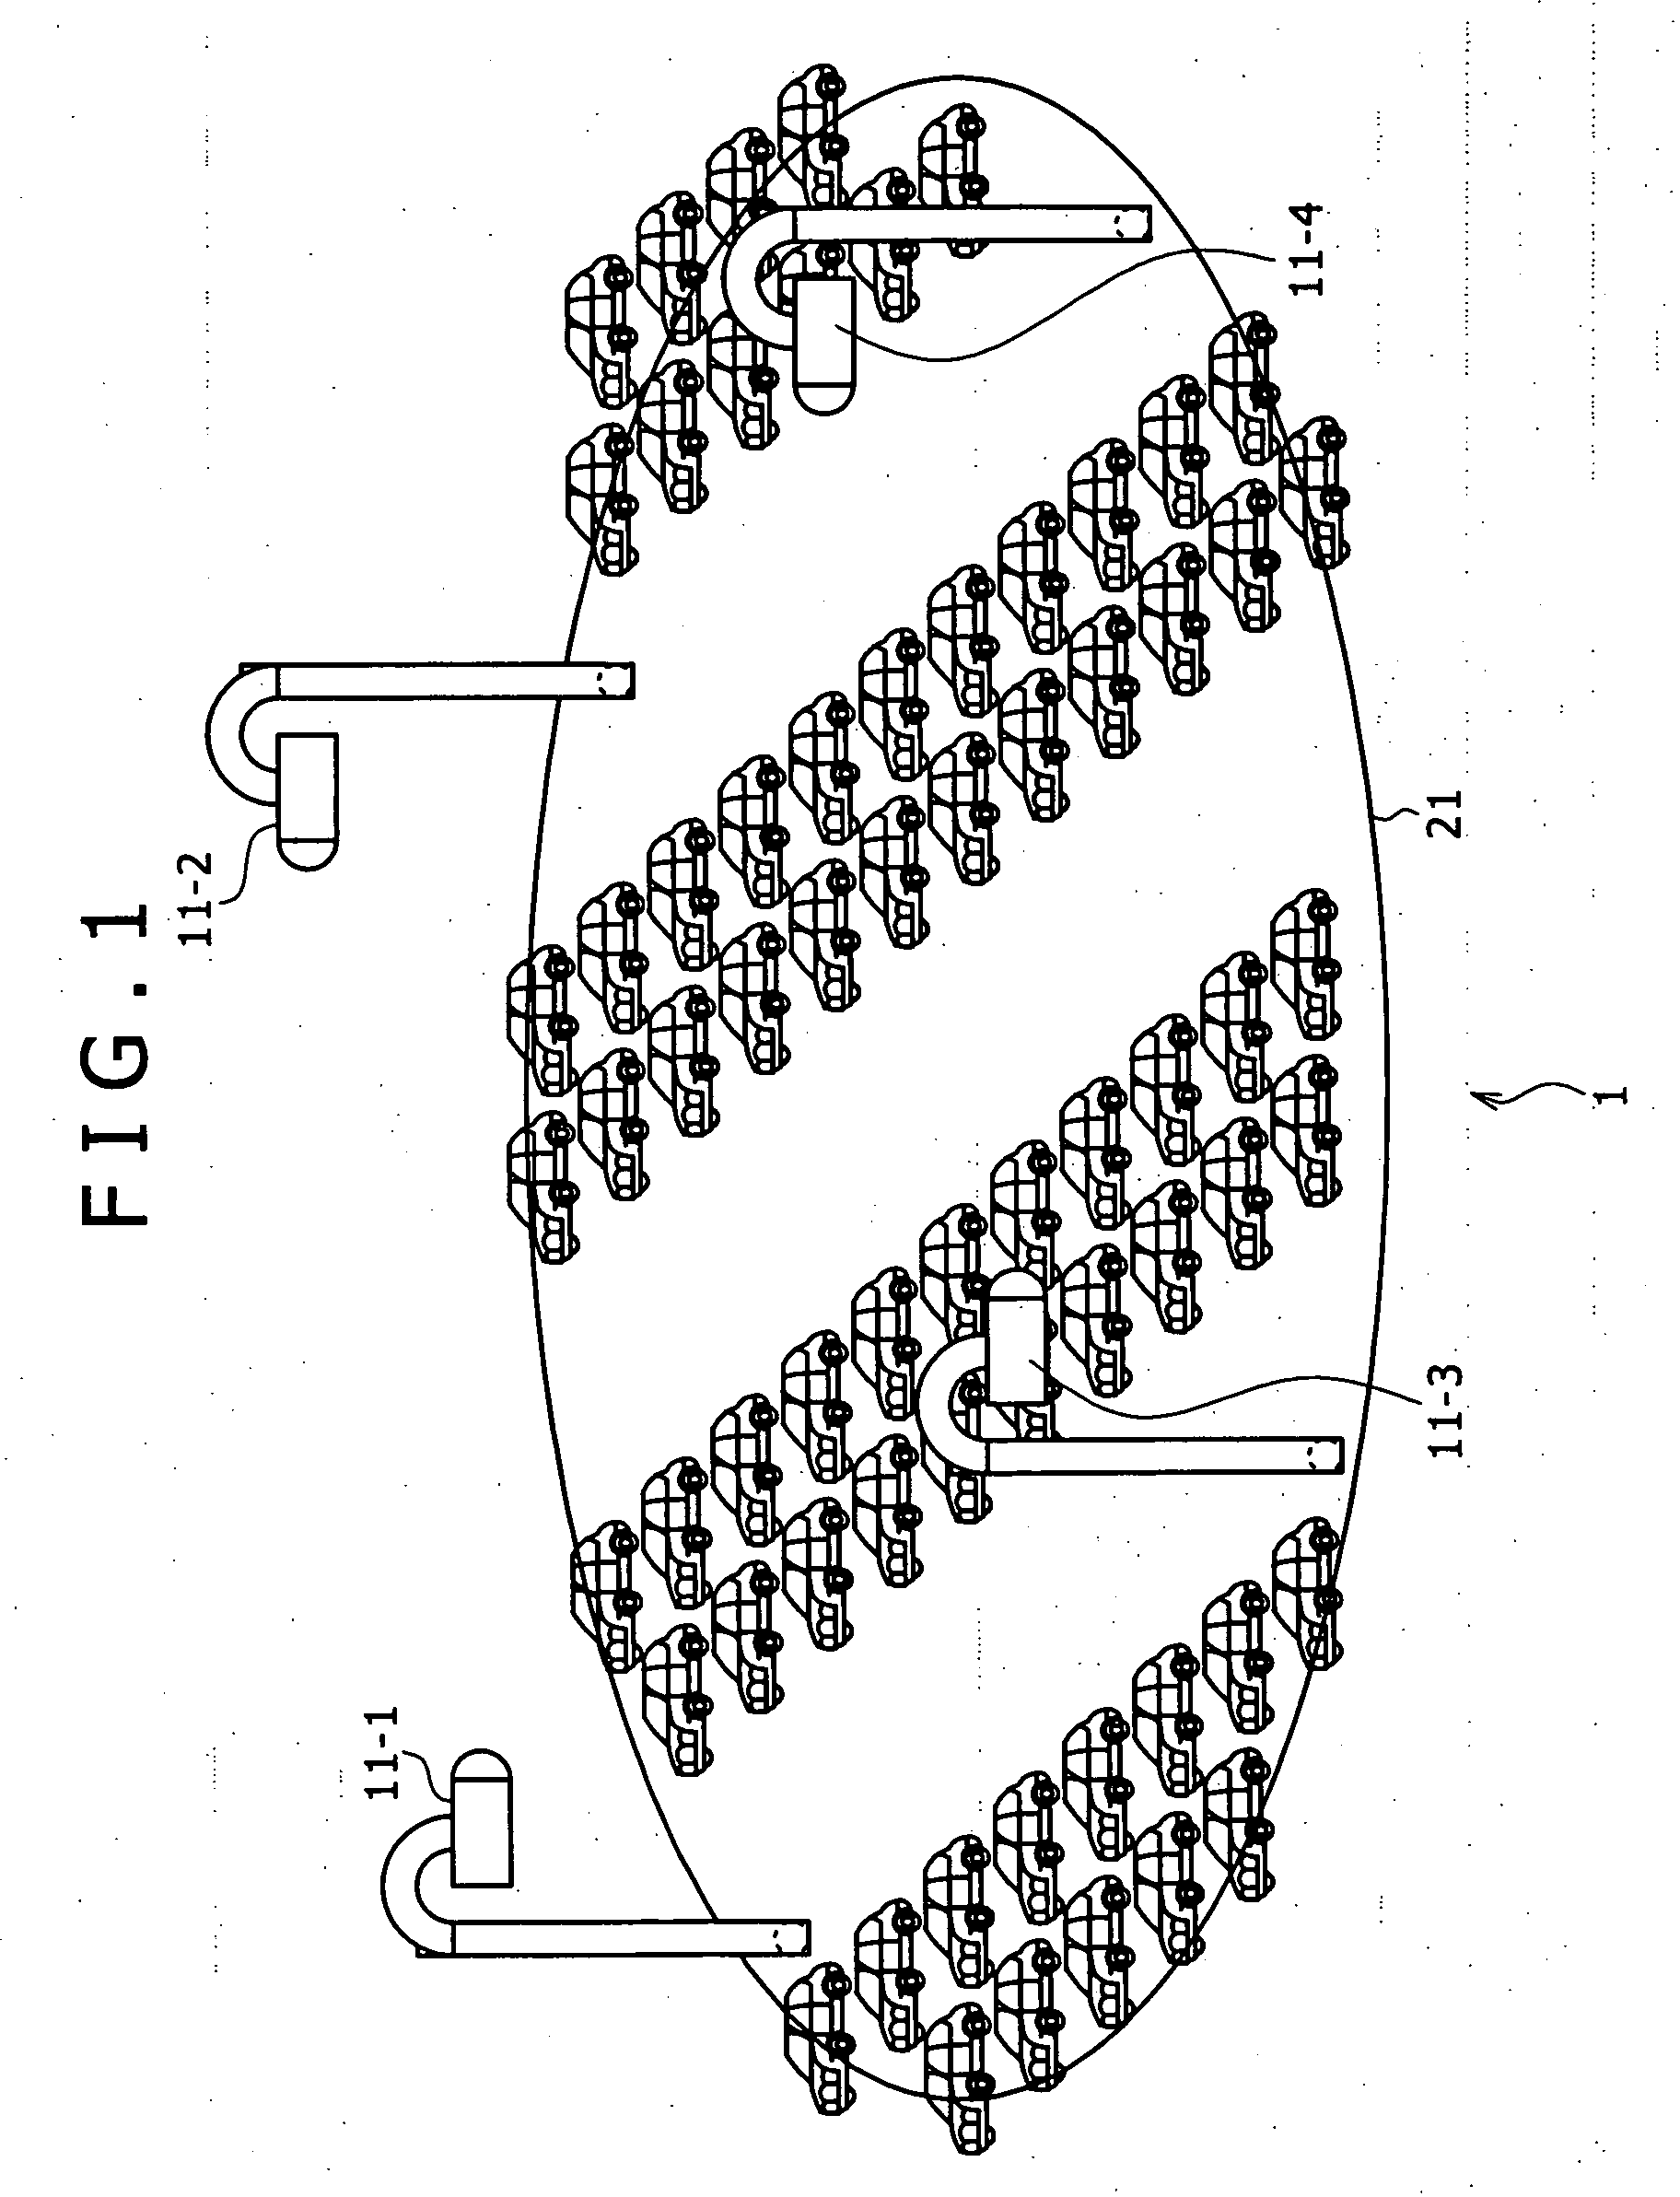 Information processing system, information processing apparatus and method, and program